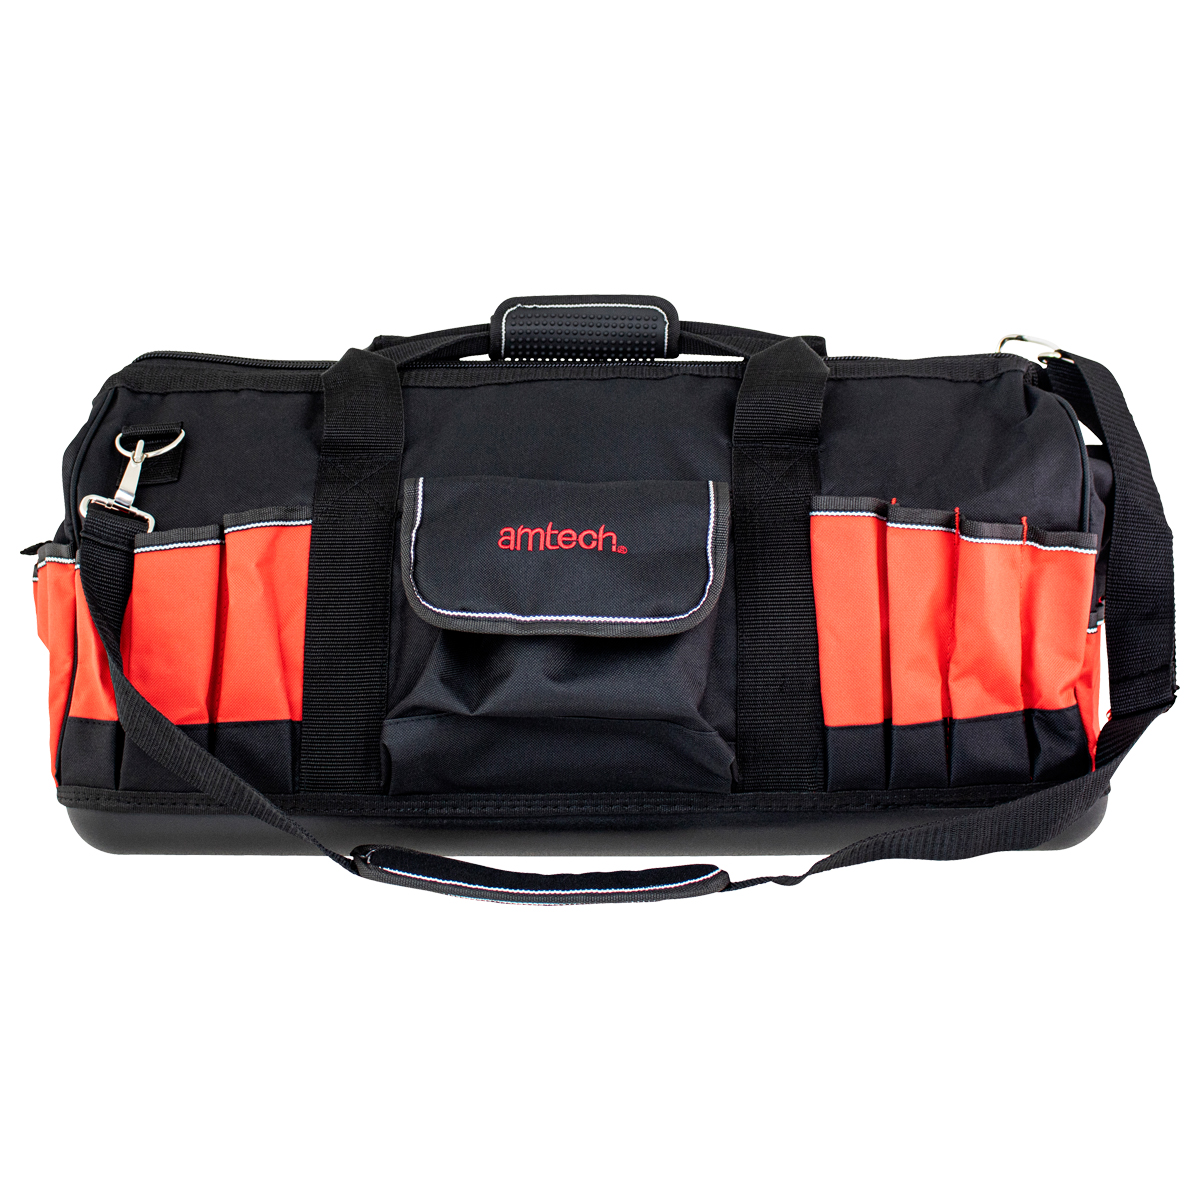 AMTECH 18" CANVAS TOOL TOOL BAG Heavy Duty Water Resistant 3 year guarantee 